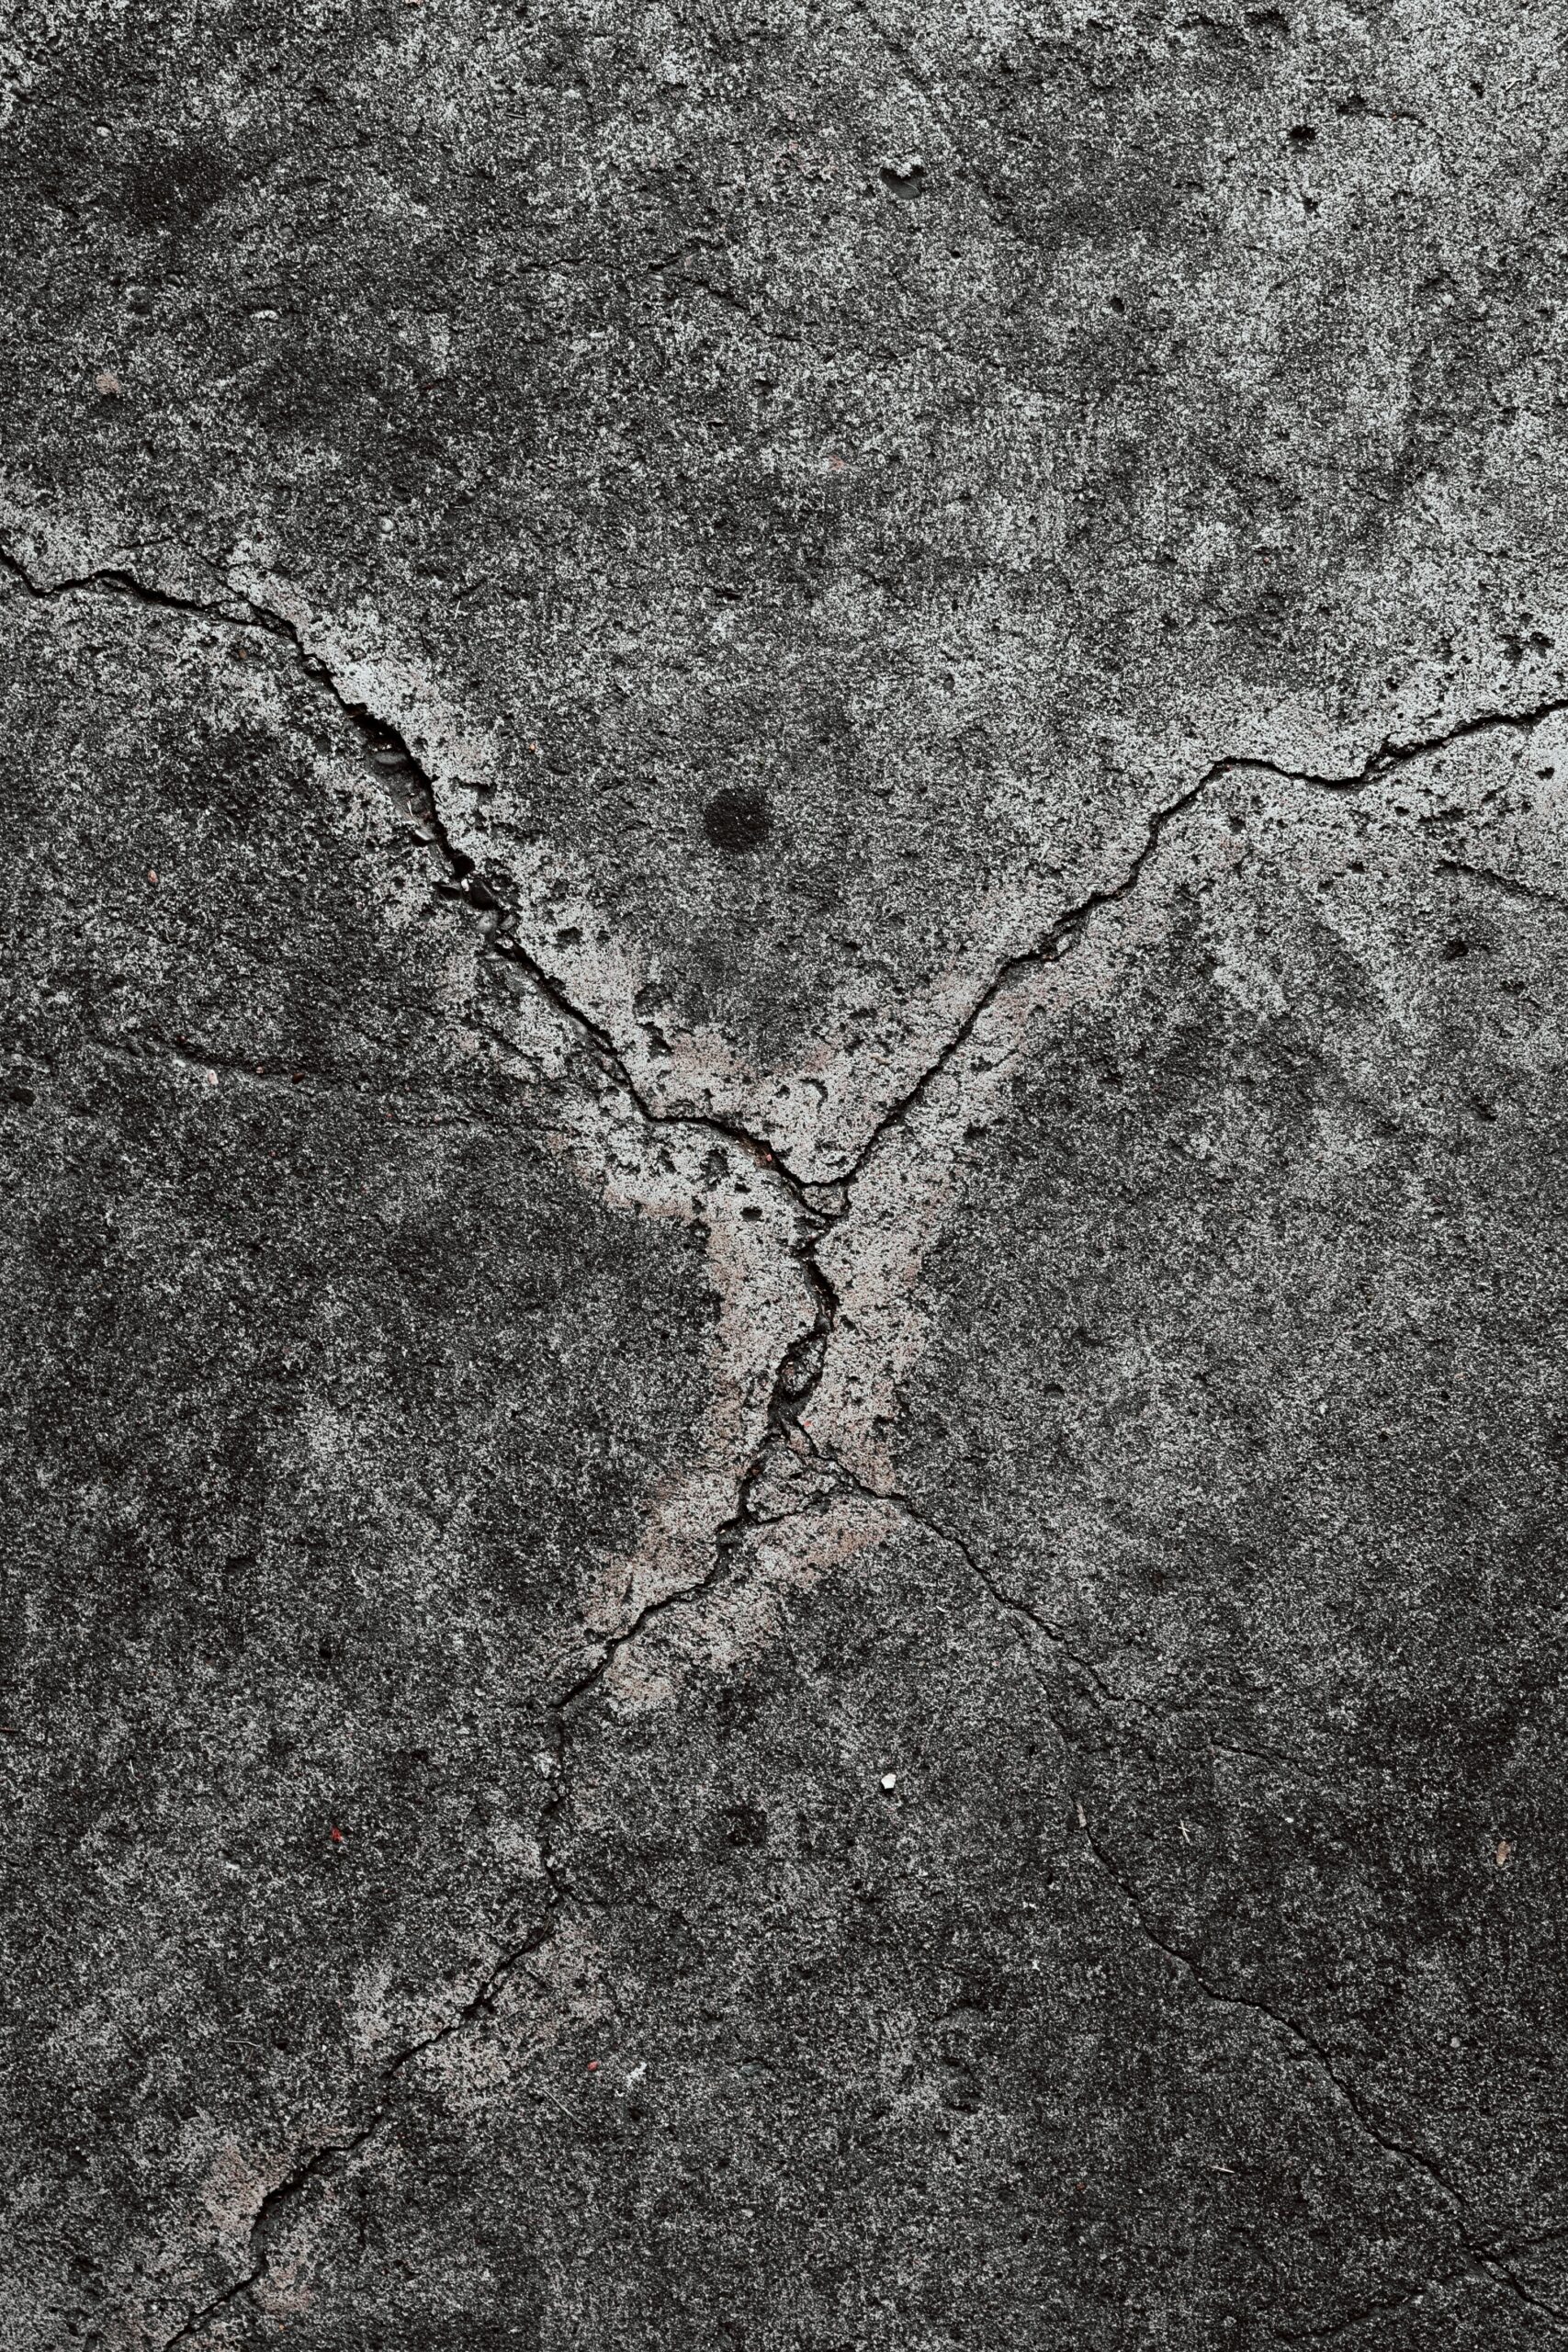 Old, cracked concrete